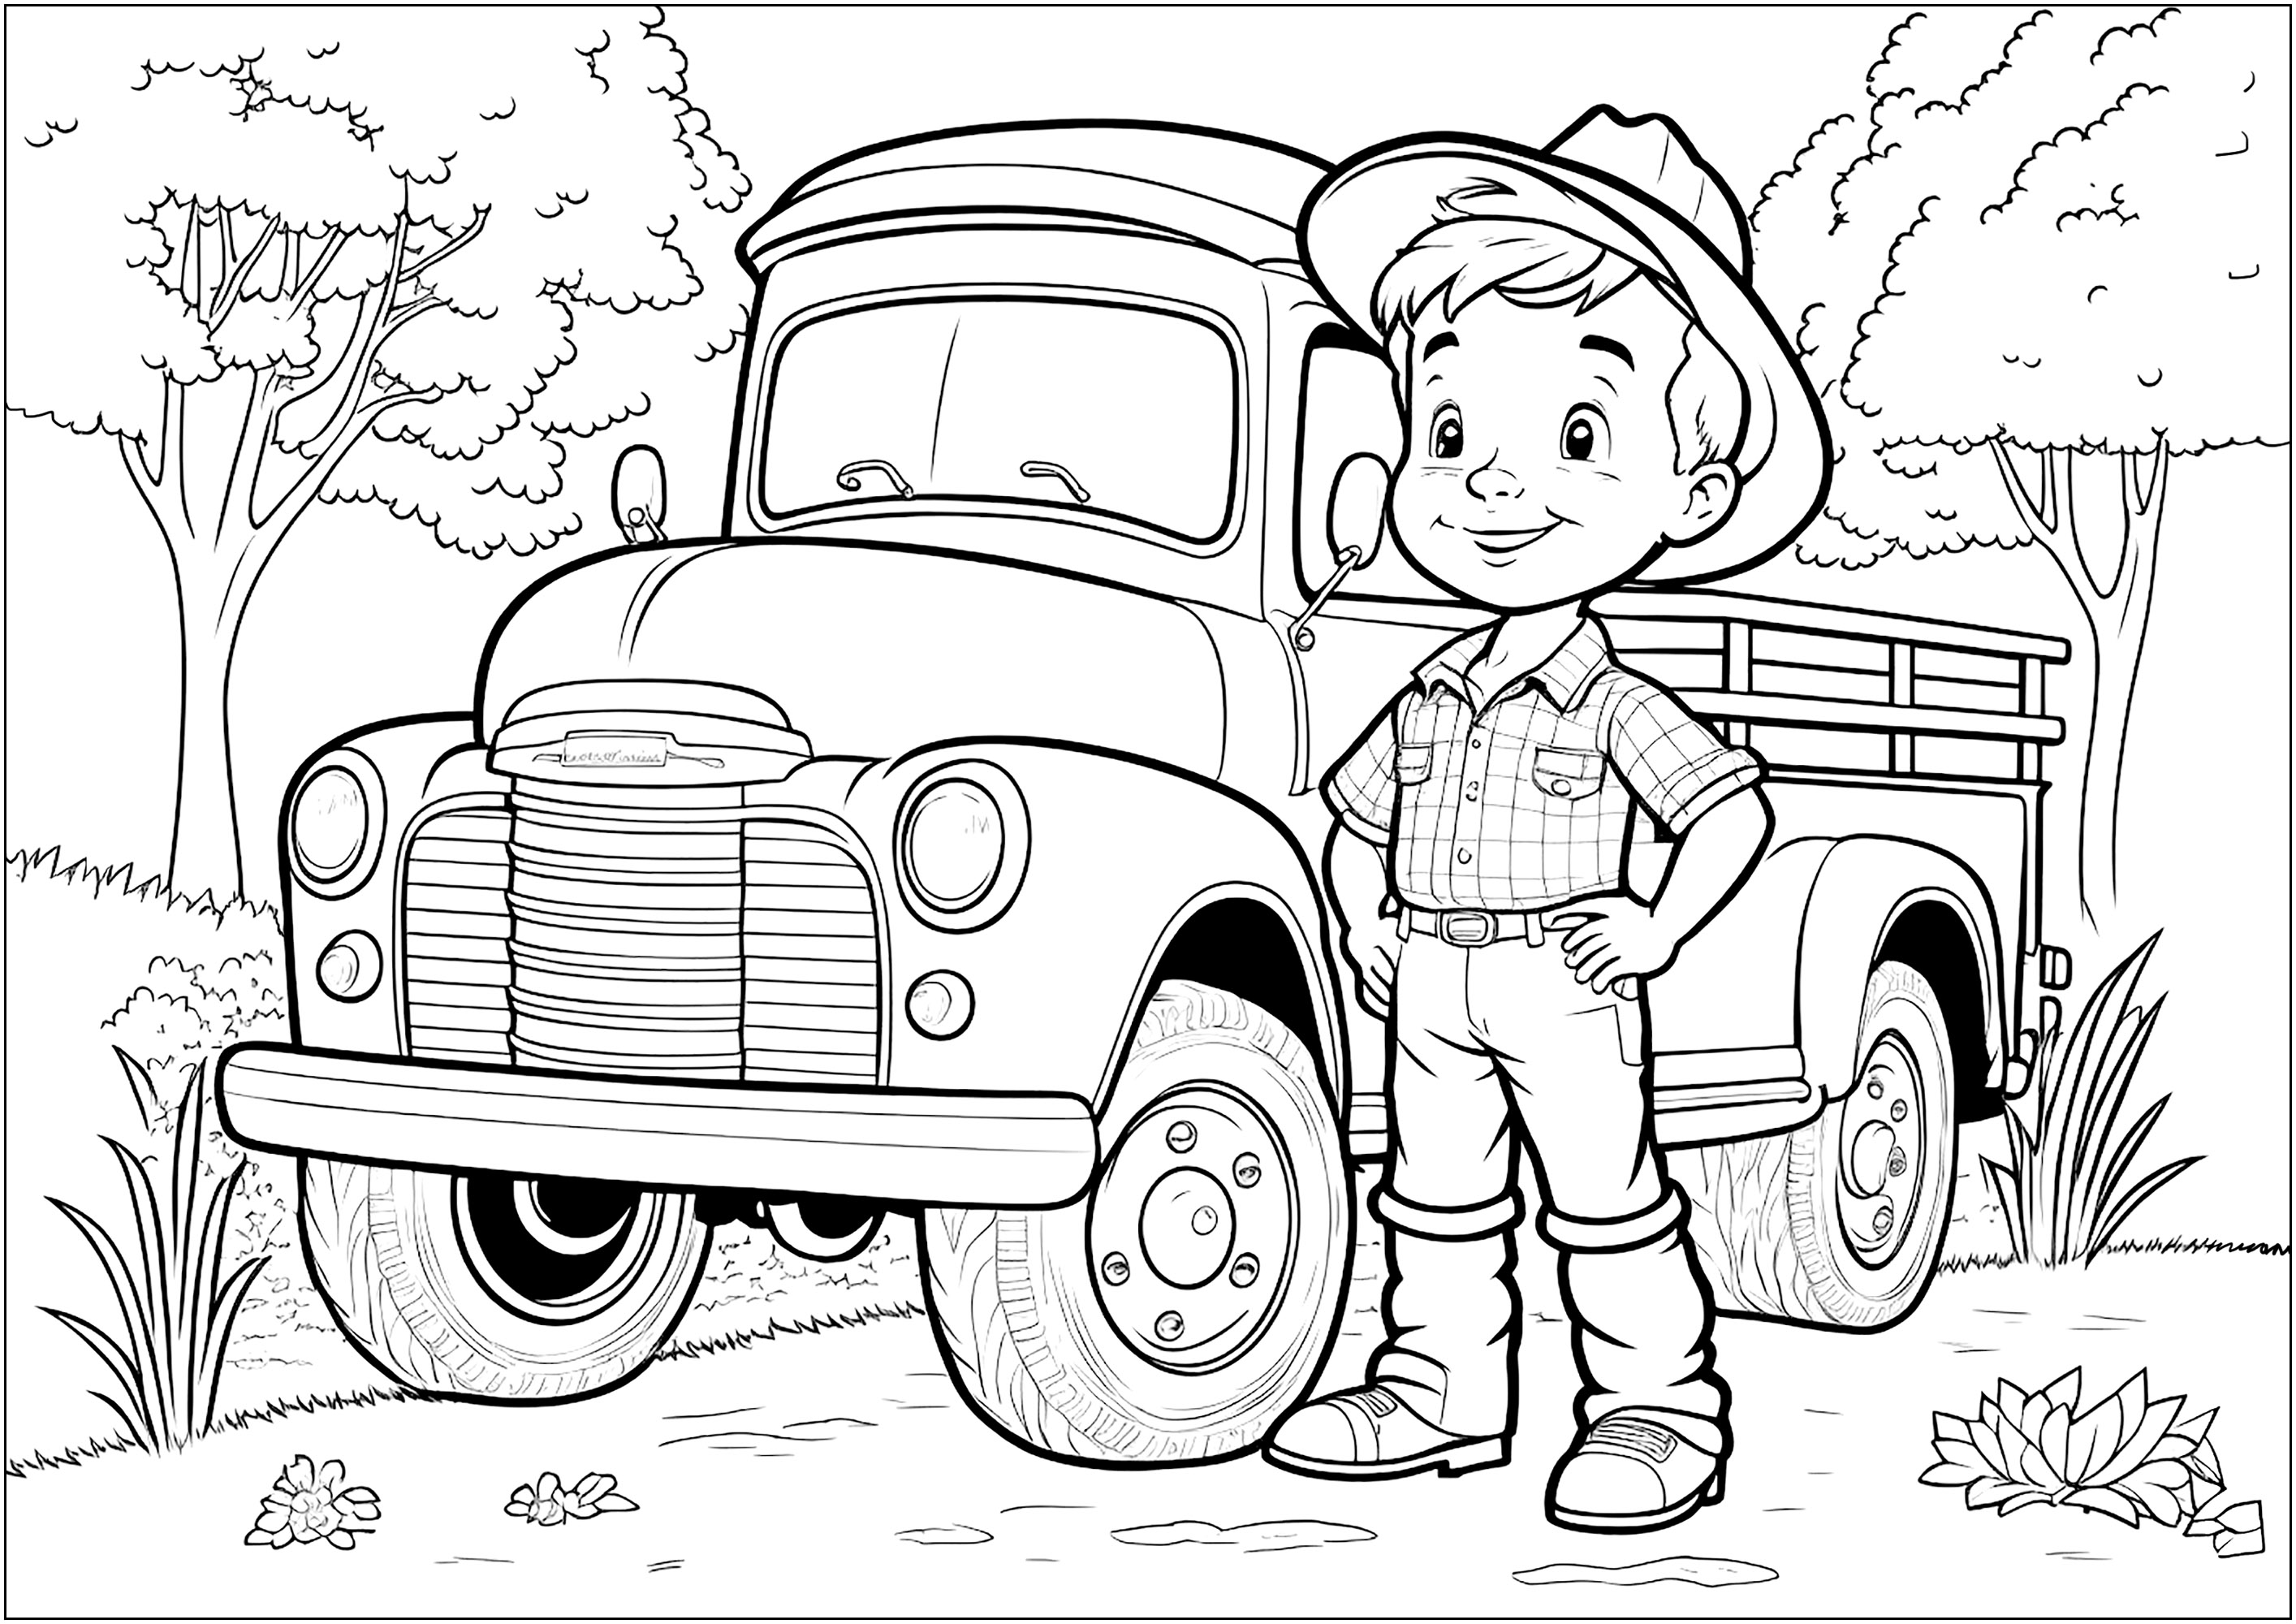 A young farmer and his truck